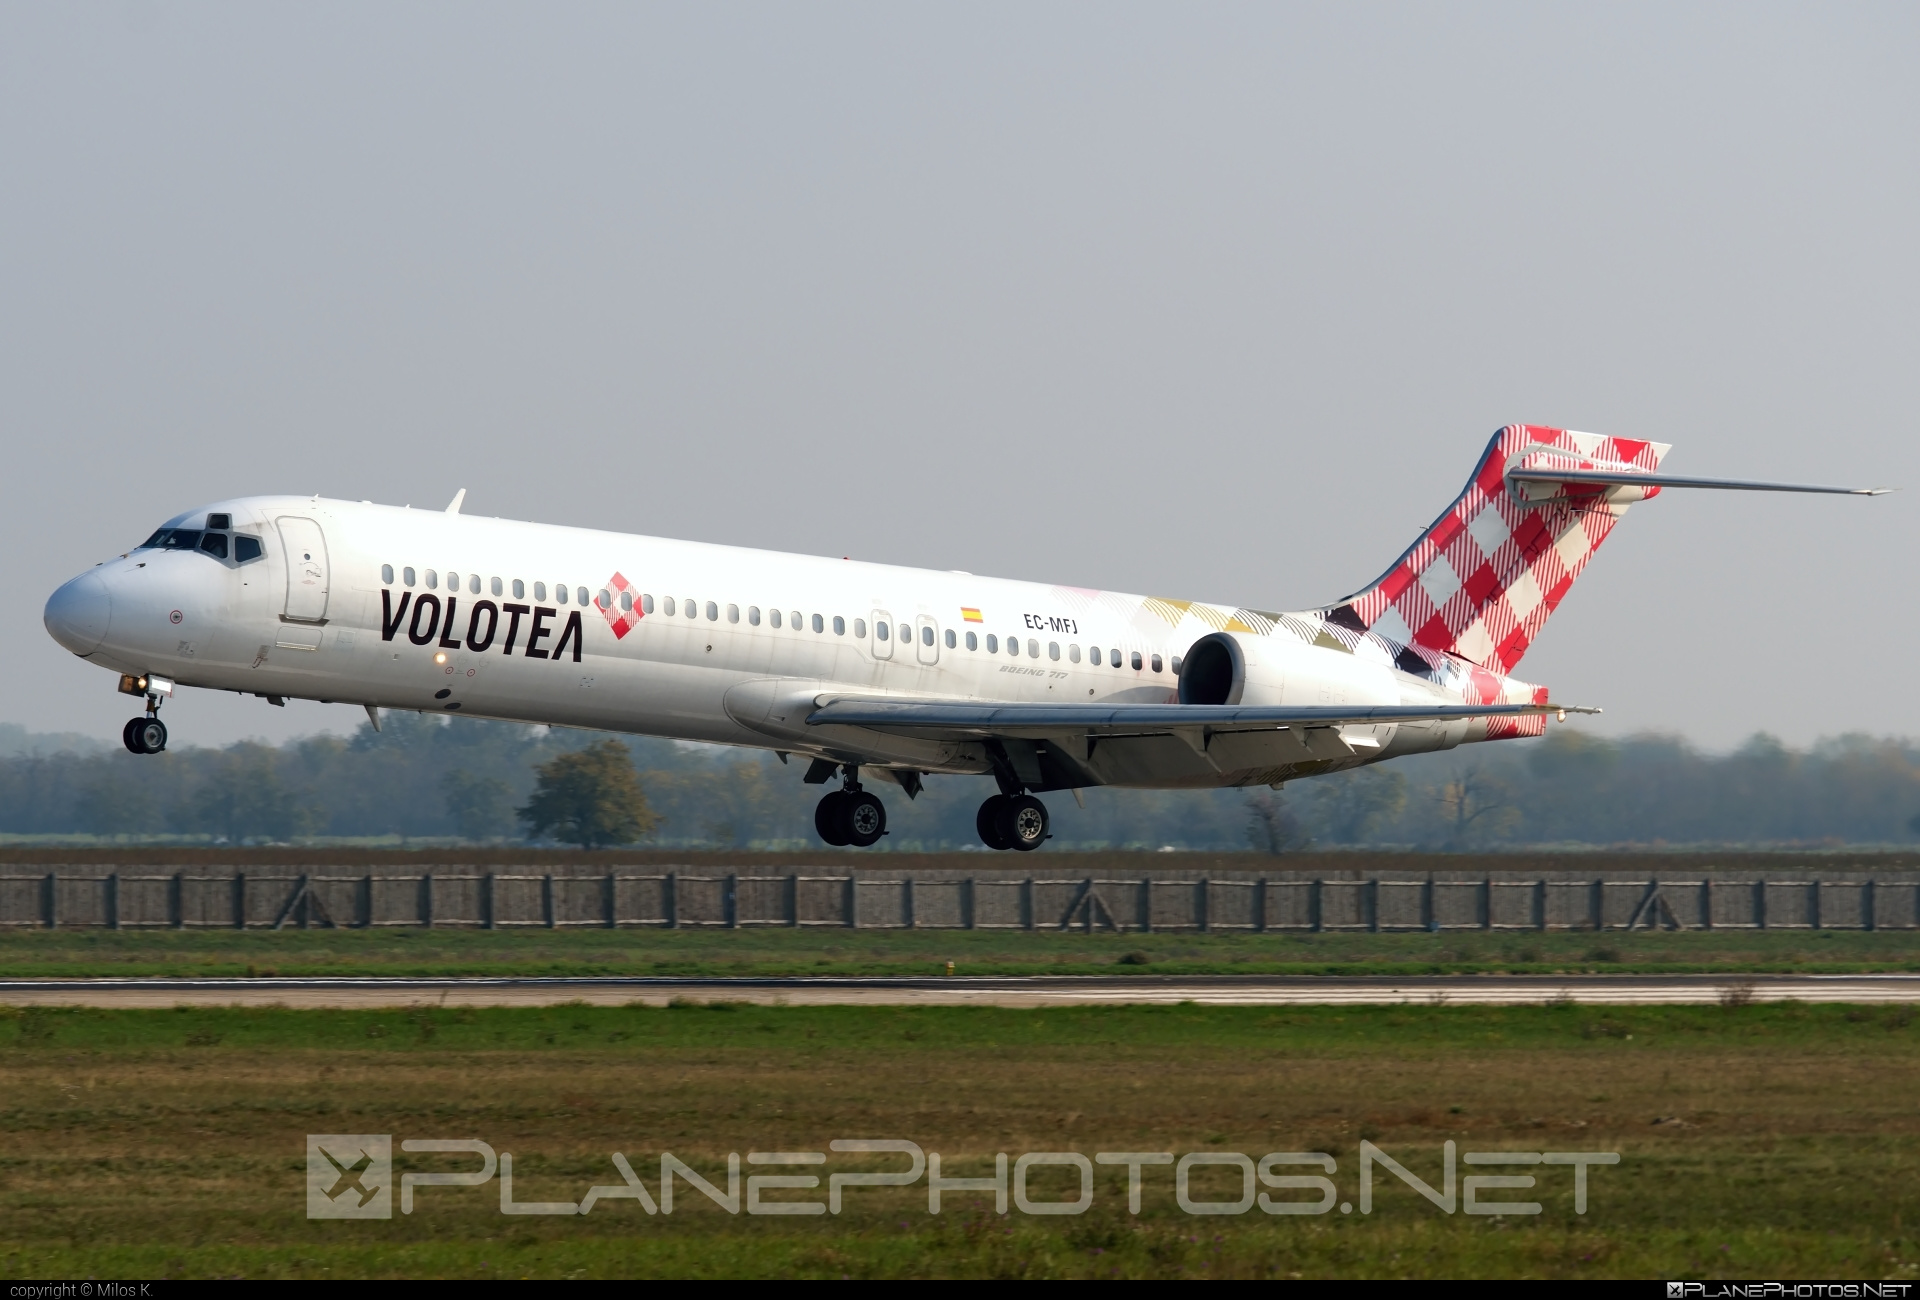 Boeing 717-200 - EC-MFJ operated by Volotea #b717 #boeing #boeing717